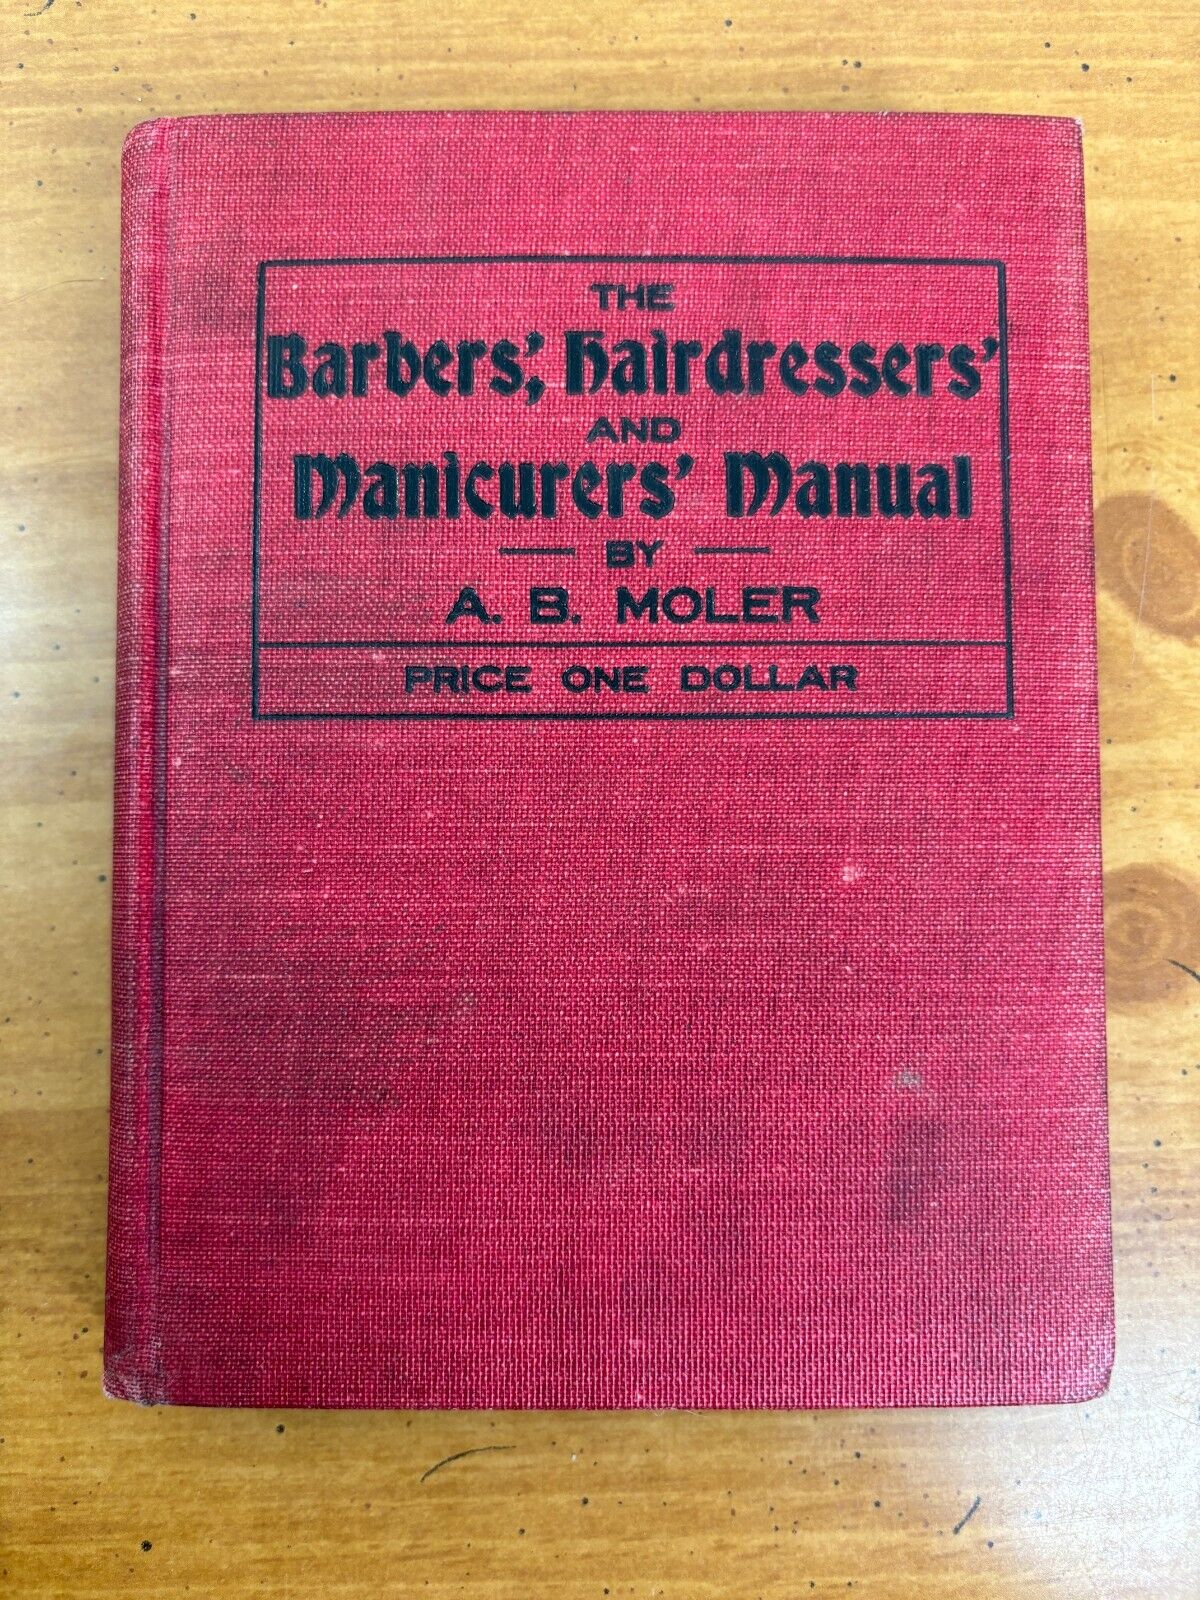 1906 The Barbers Hairdressers and Manicurers Manual by Moler - Hardcover 1st Ed